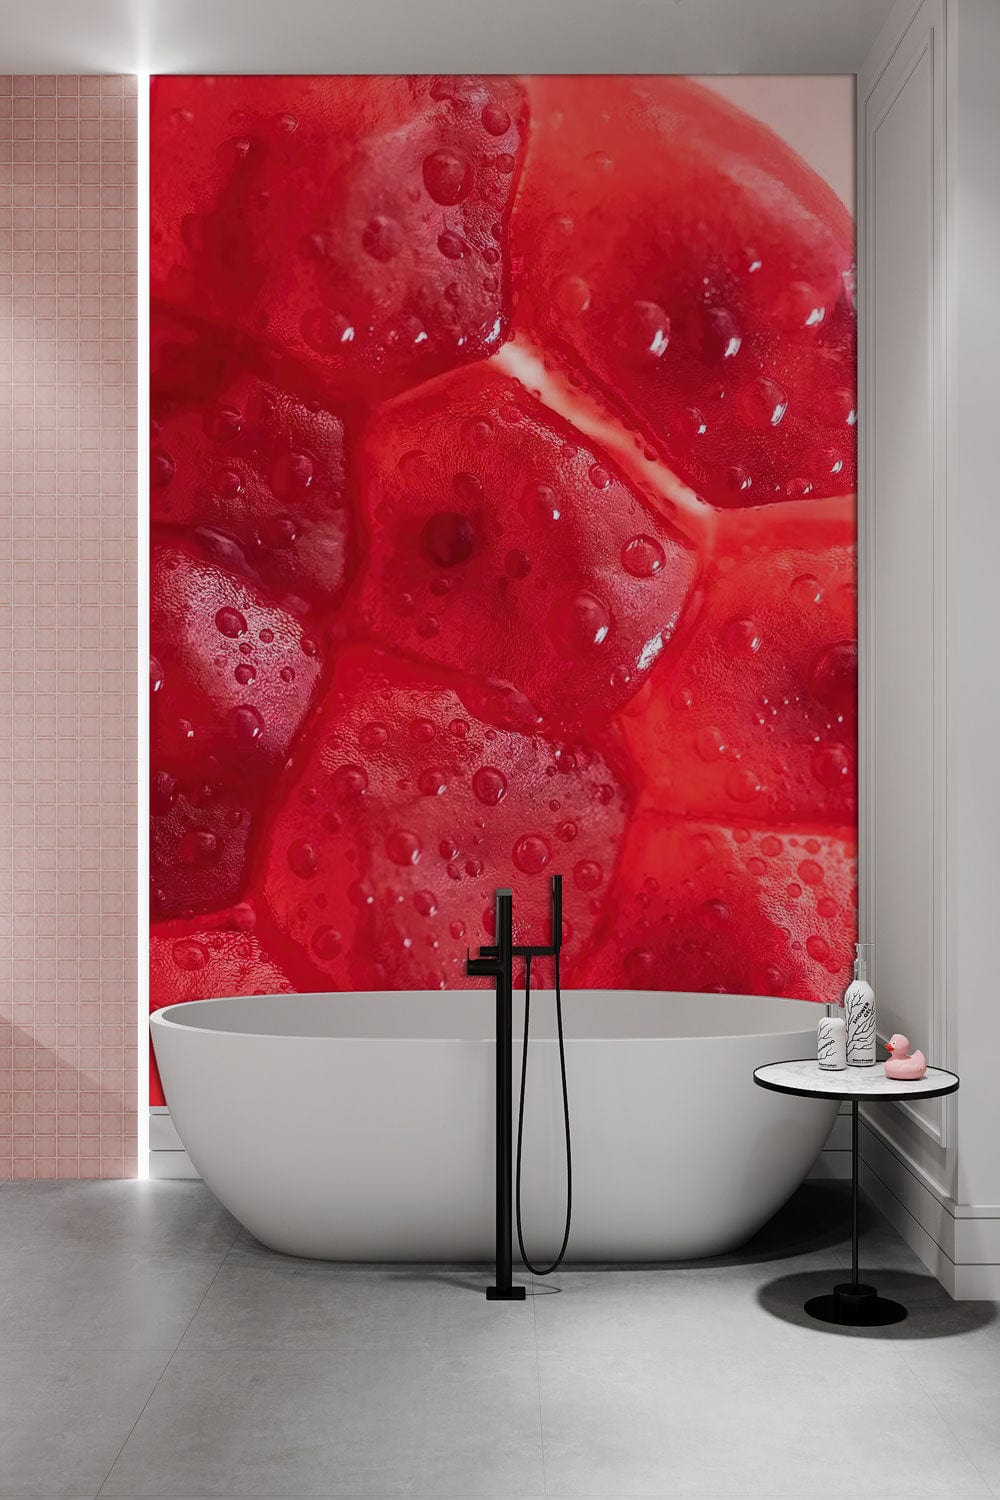 Bathroom Wall Decoration Featuring a Crystalline Pomegranate Wallpaper Mural